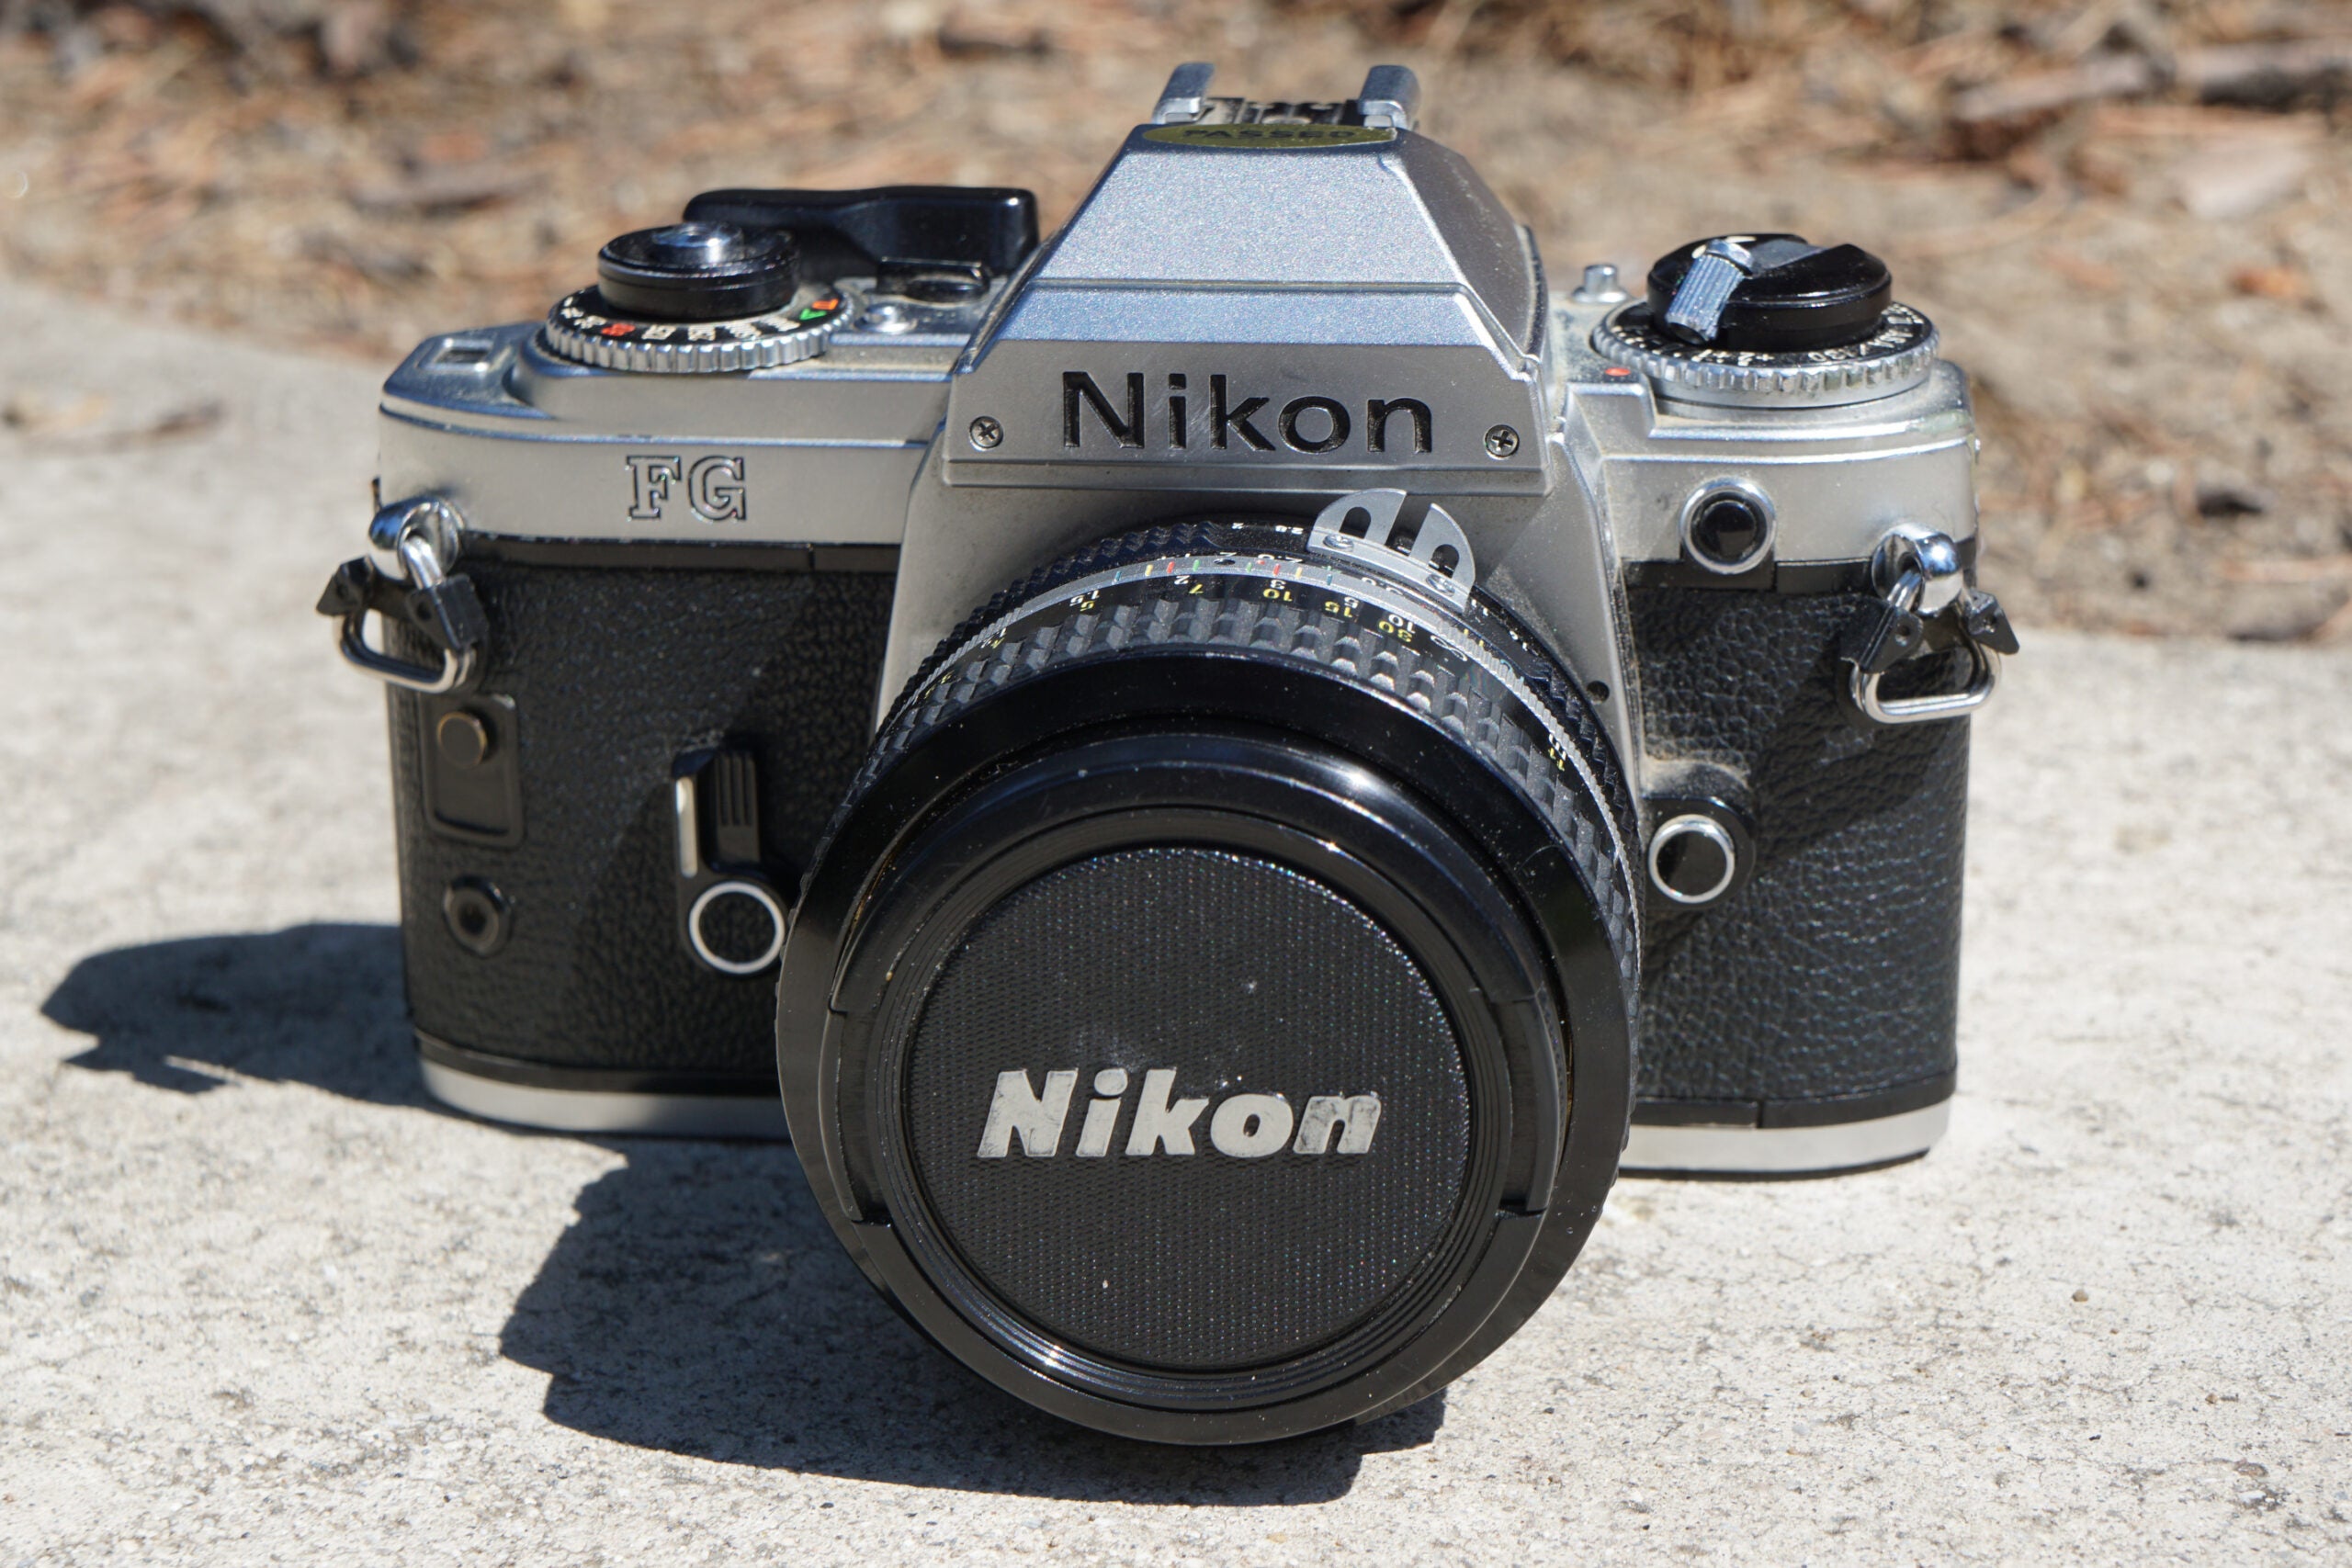 The Nikon FG film camera from the front